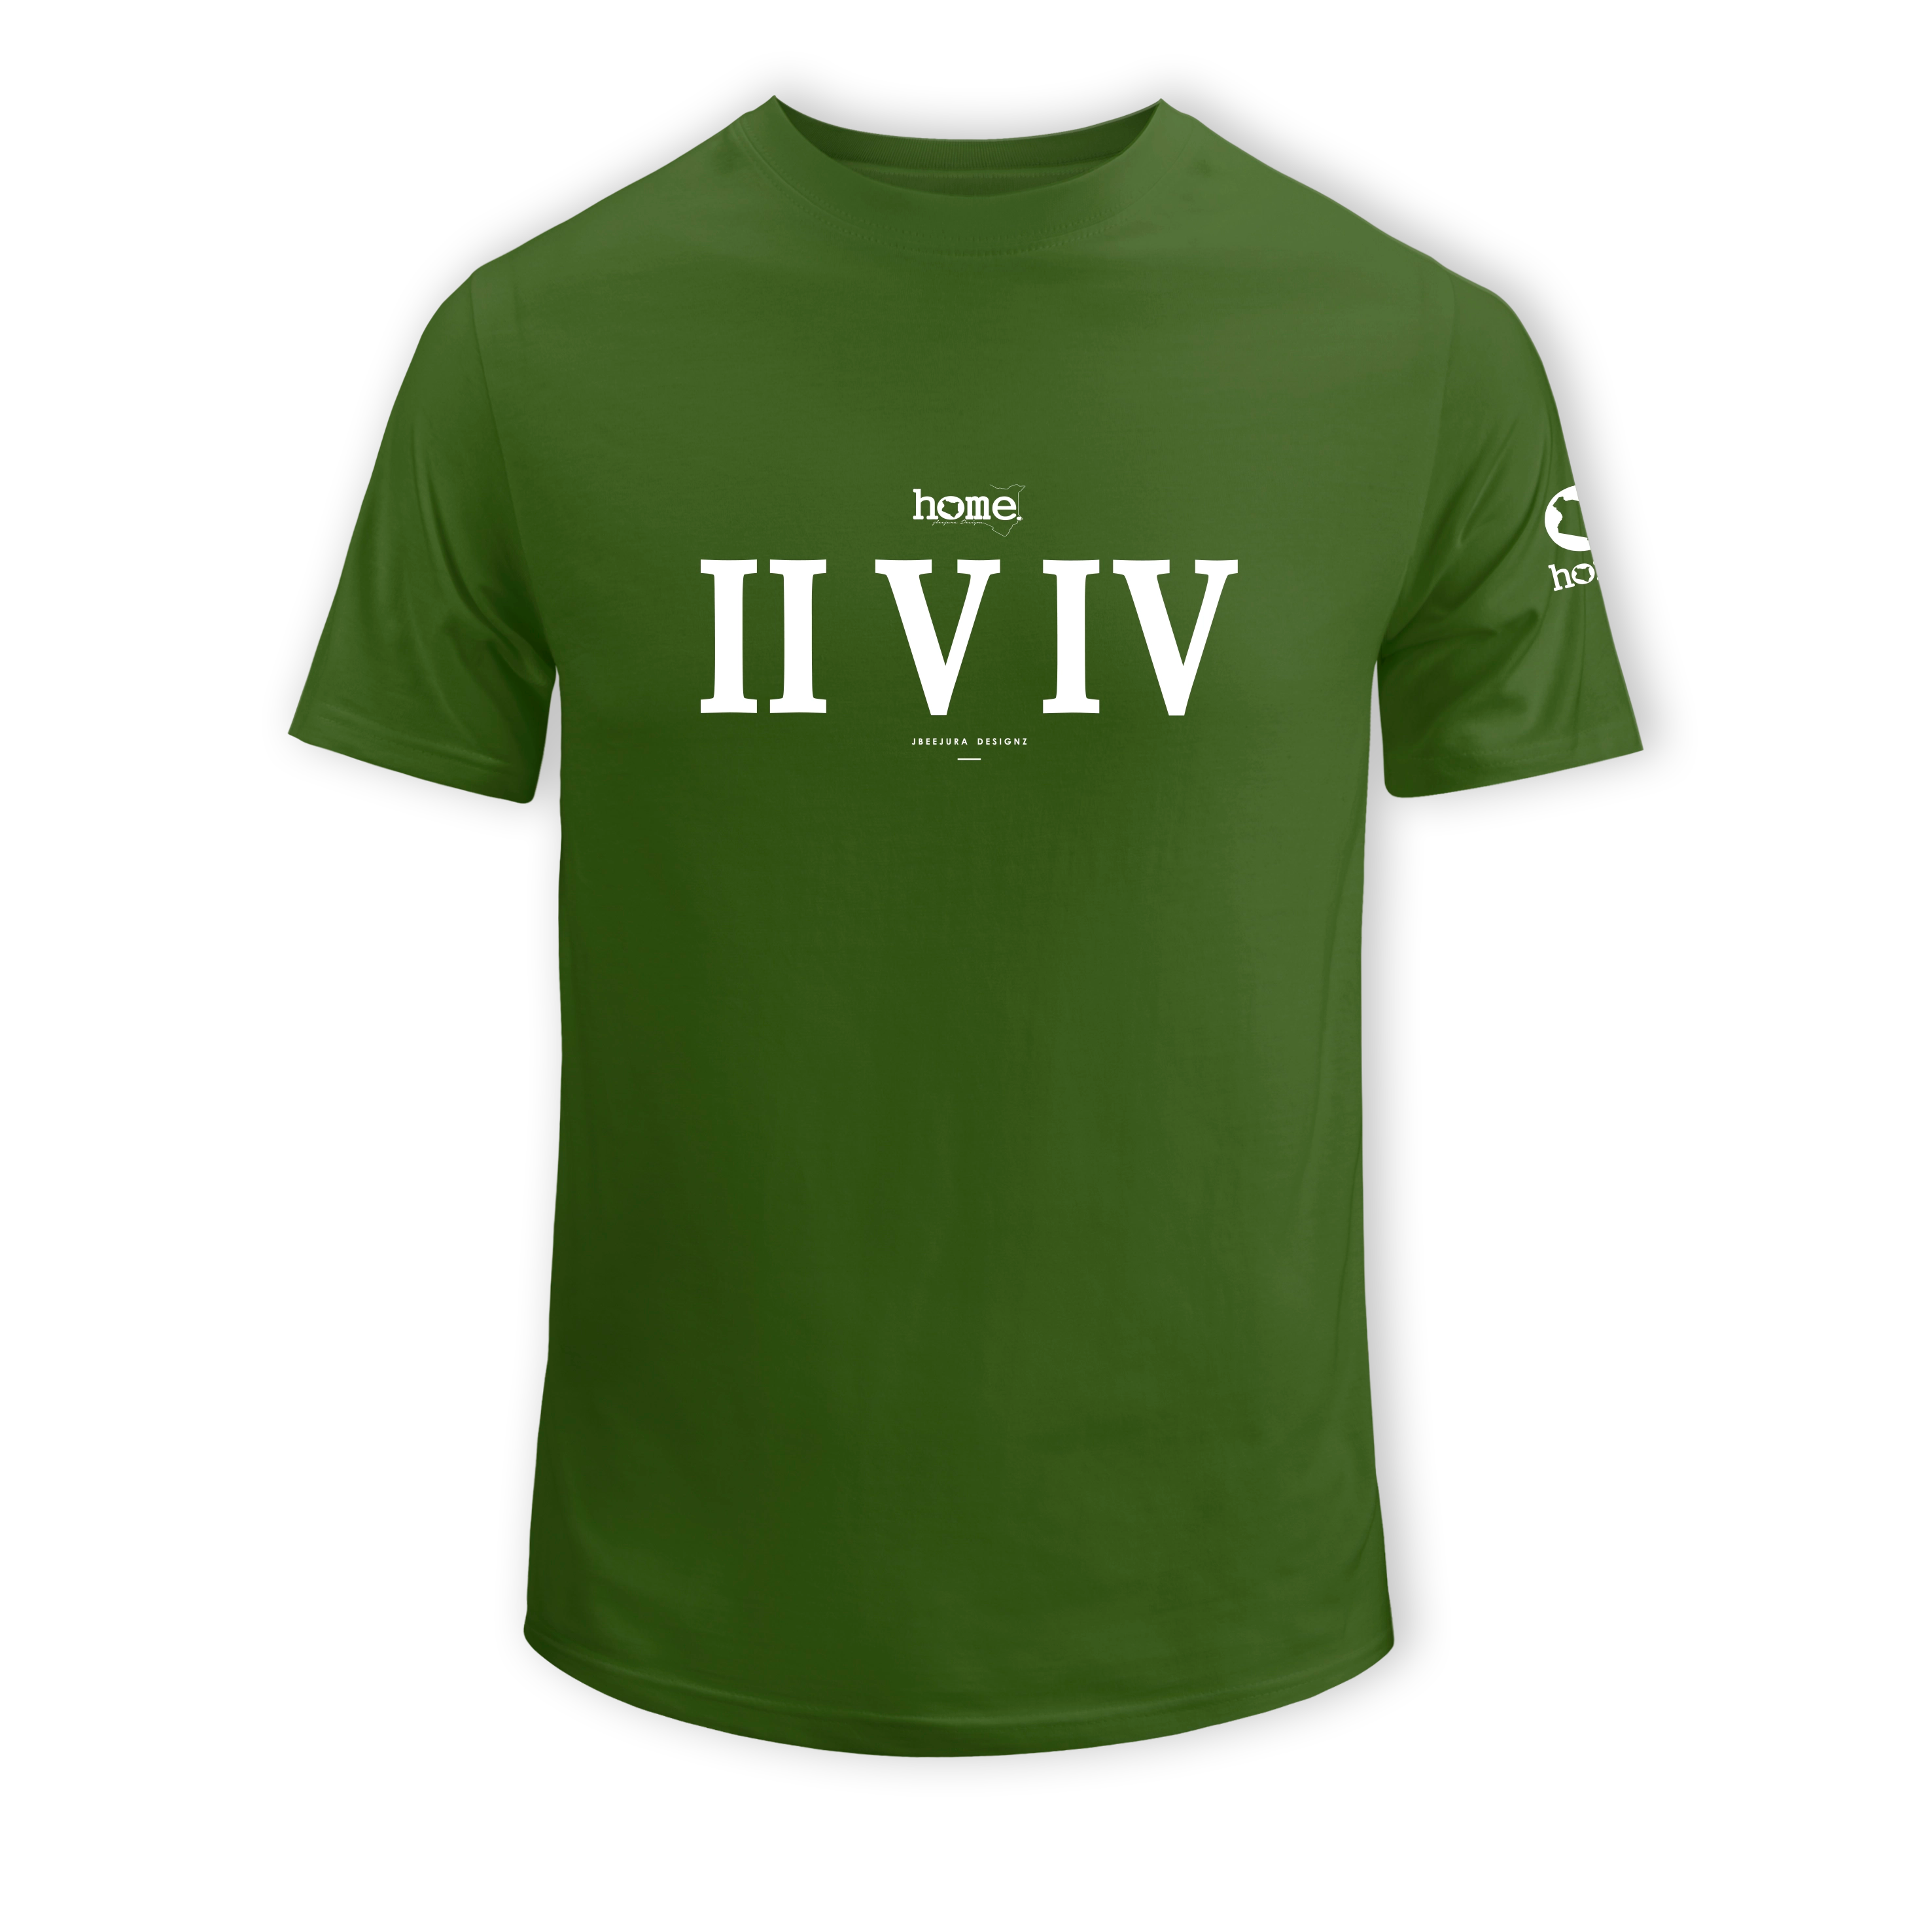 home_254 SHORT-SLEEVED JUNGLE GREEN T-SHIRT WITH A WHITE ROMAN NUMERALS PRINT – COTTON PLUS FABRIC